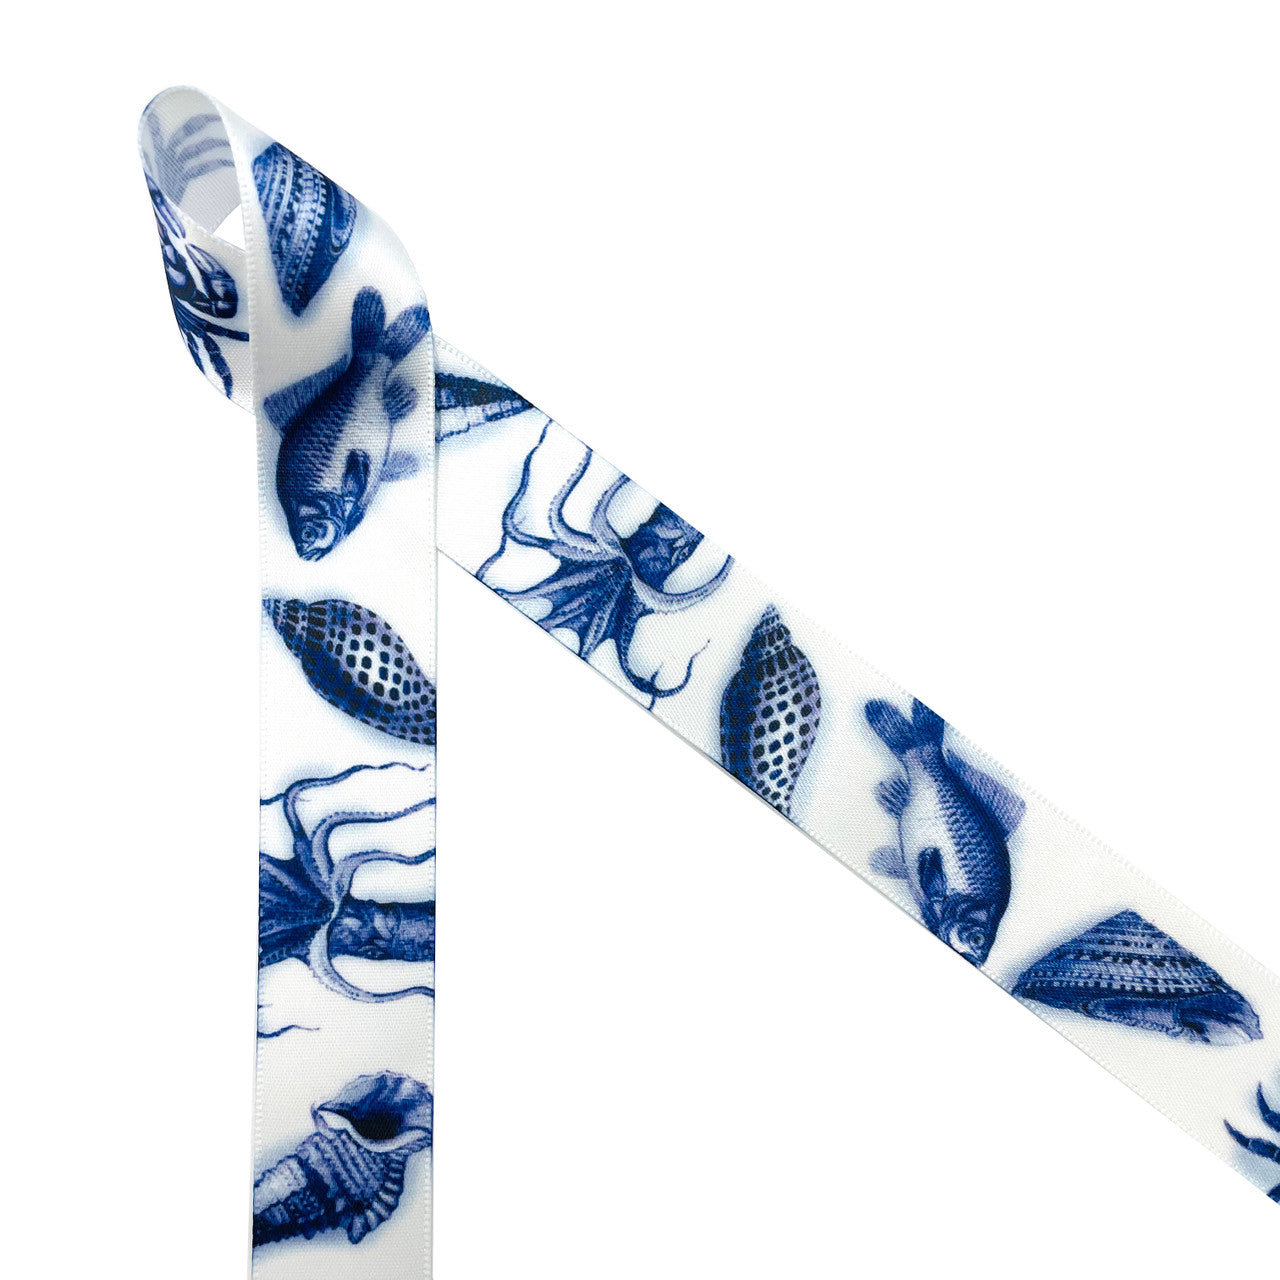  Vintage sea creatures inspire the imagination! Vintage sea creatures in navy blue featuring conch shells, clam shells, fish and octopi printed on 7/8" white single face satin are a wonderful addition to any Nautical or seafaring themed party. This is a great ribbon for Father's Day, bachelor parties, beach themed parties, gift wrap, party decor, party favors, cookies, cake pops and dessert tables. Use this ribbon for ocean themed crafts, sewing and quilting projects too. All our ribbon is designed and prin